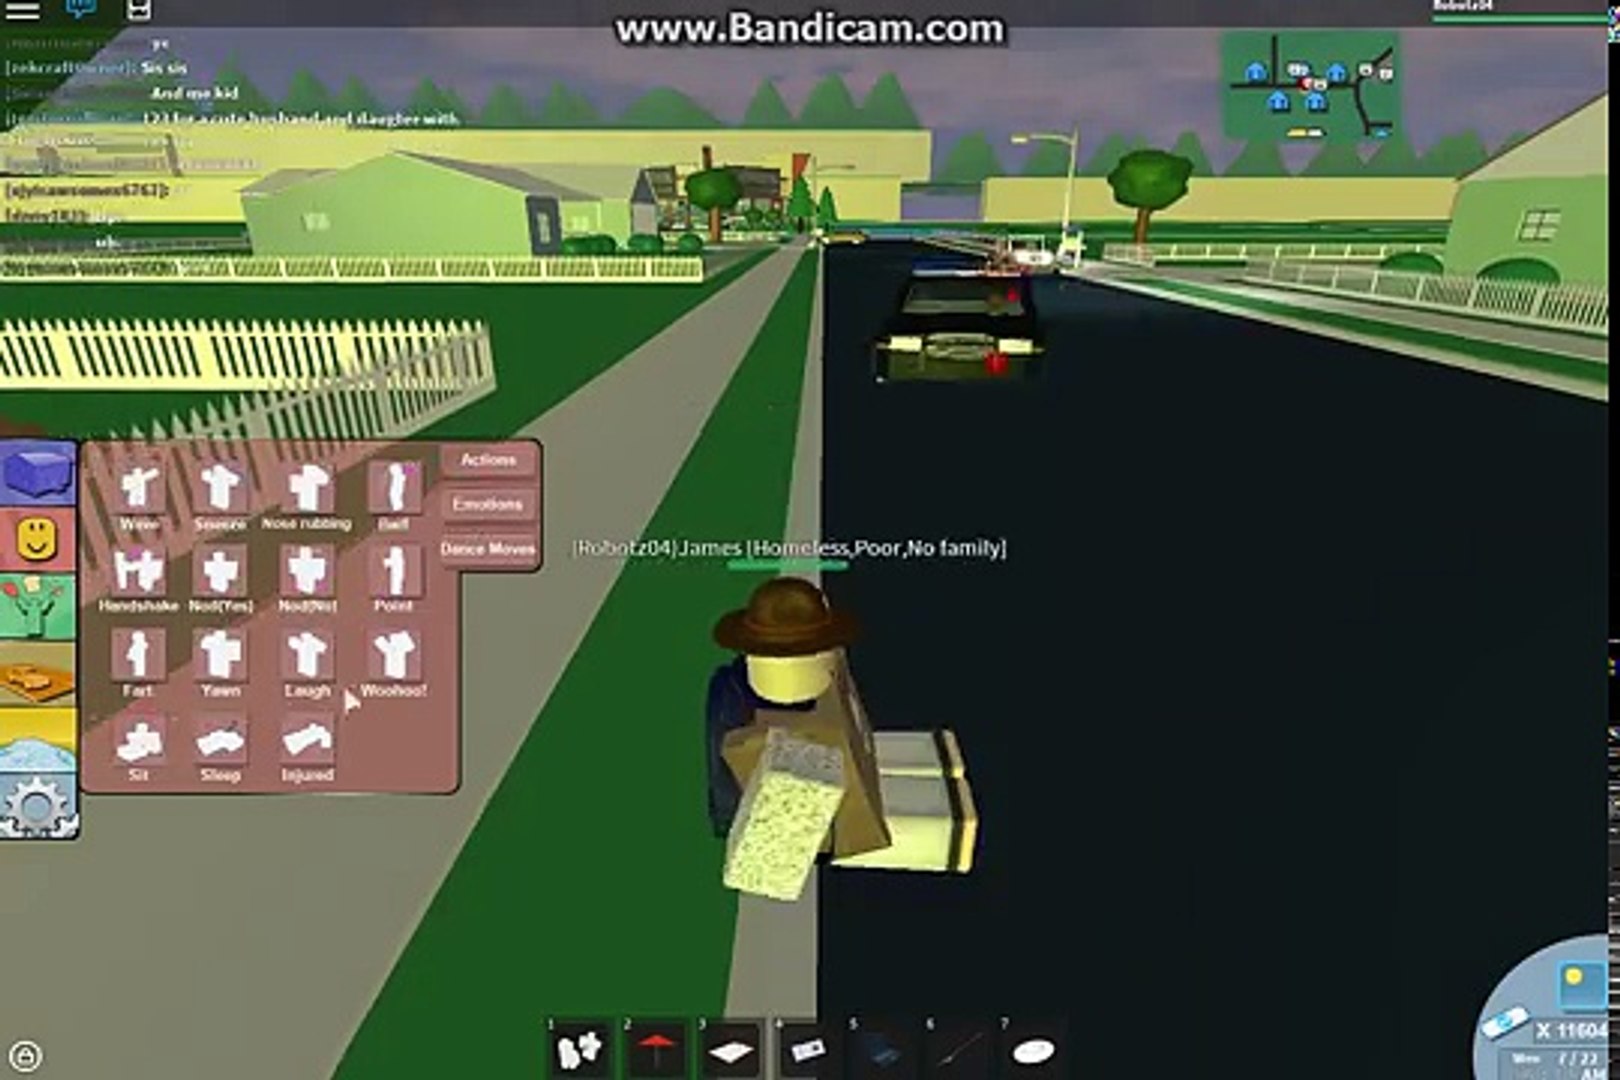 Roblox Homeless Social Experiment Gone Wrong Knife Pulled